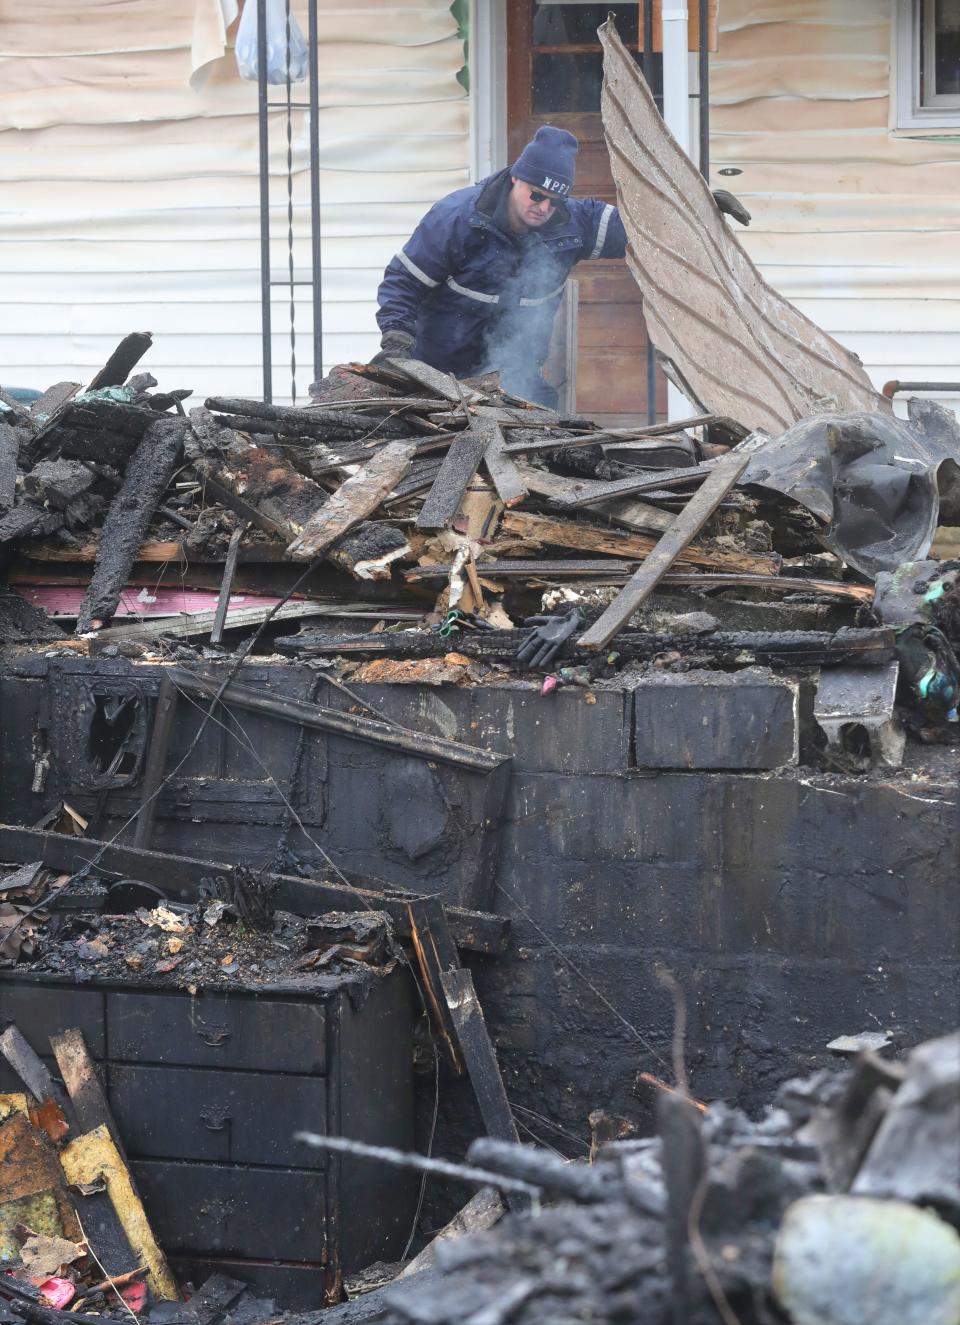 A fire official inspects the scene of a fatal fire on Spaulding Avenue in Newcomerstown.